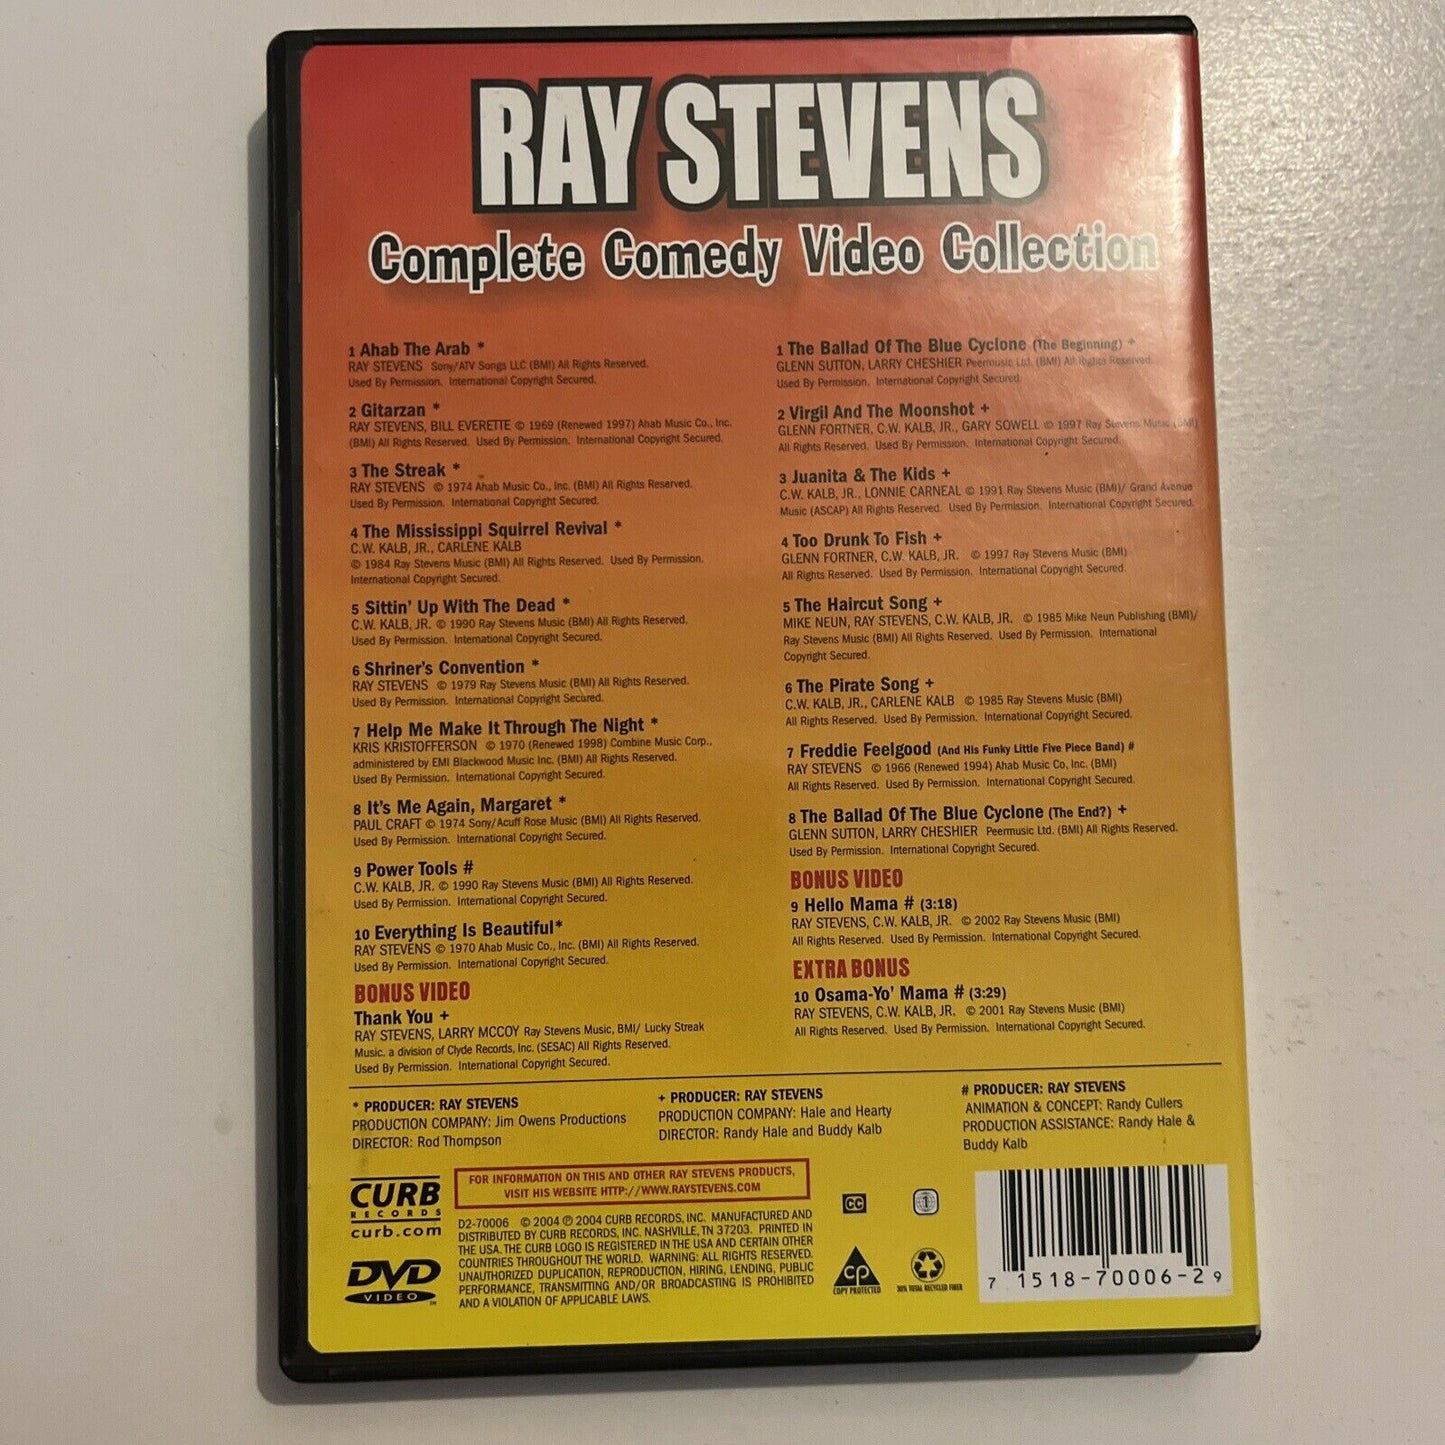 Ray Stevens - Complete Comedy Video Collection (DVD, 2004, 2-Disc)